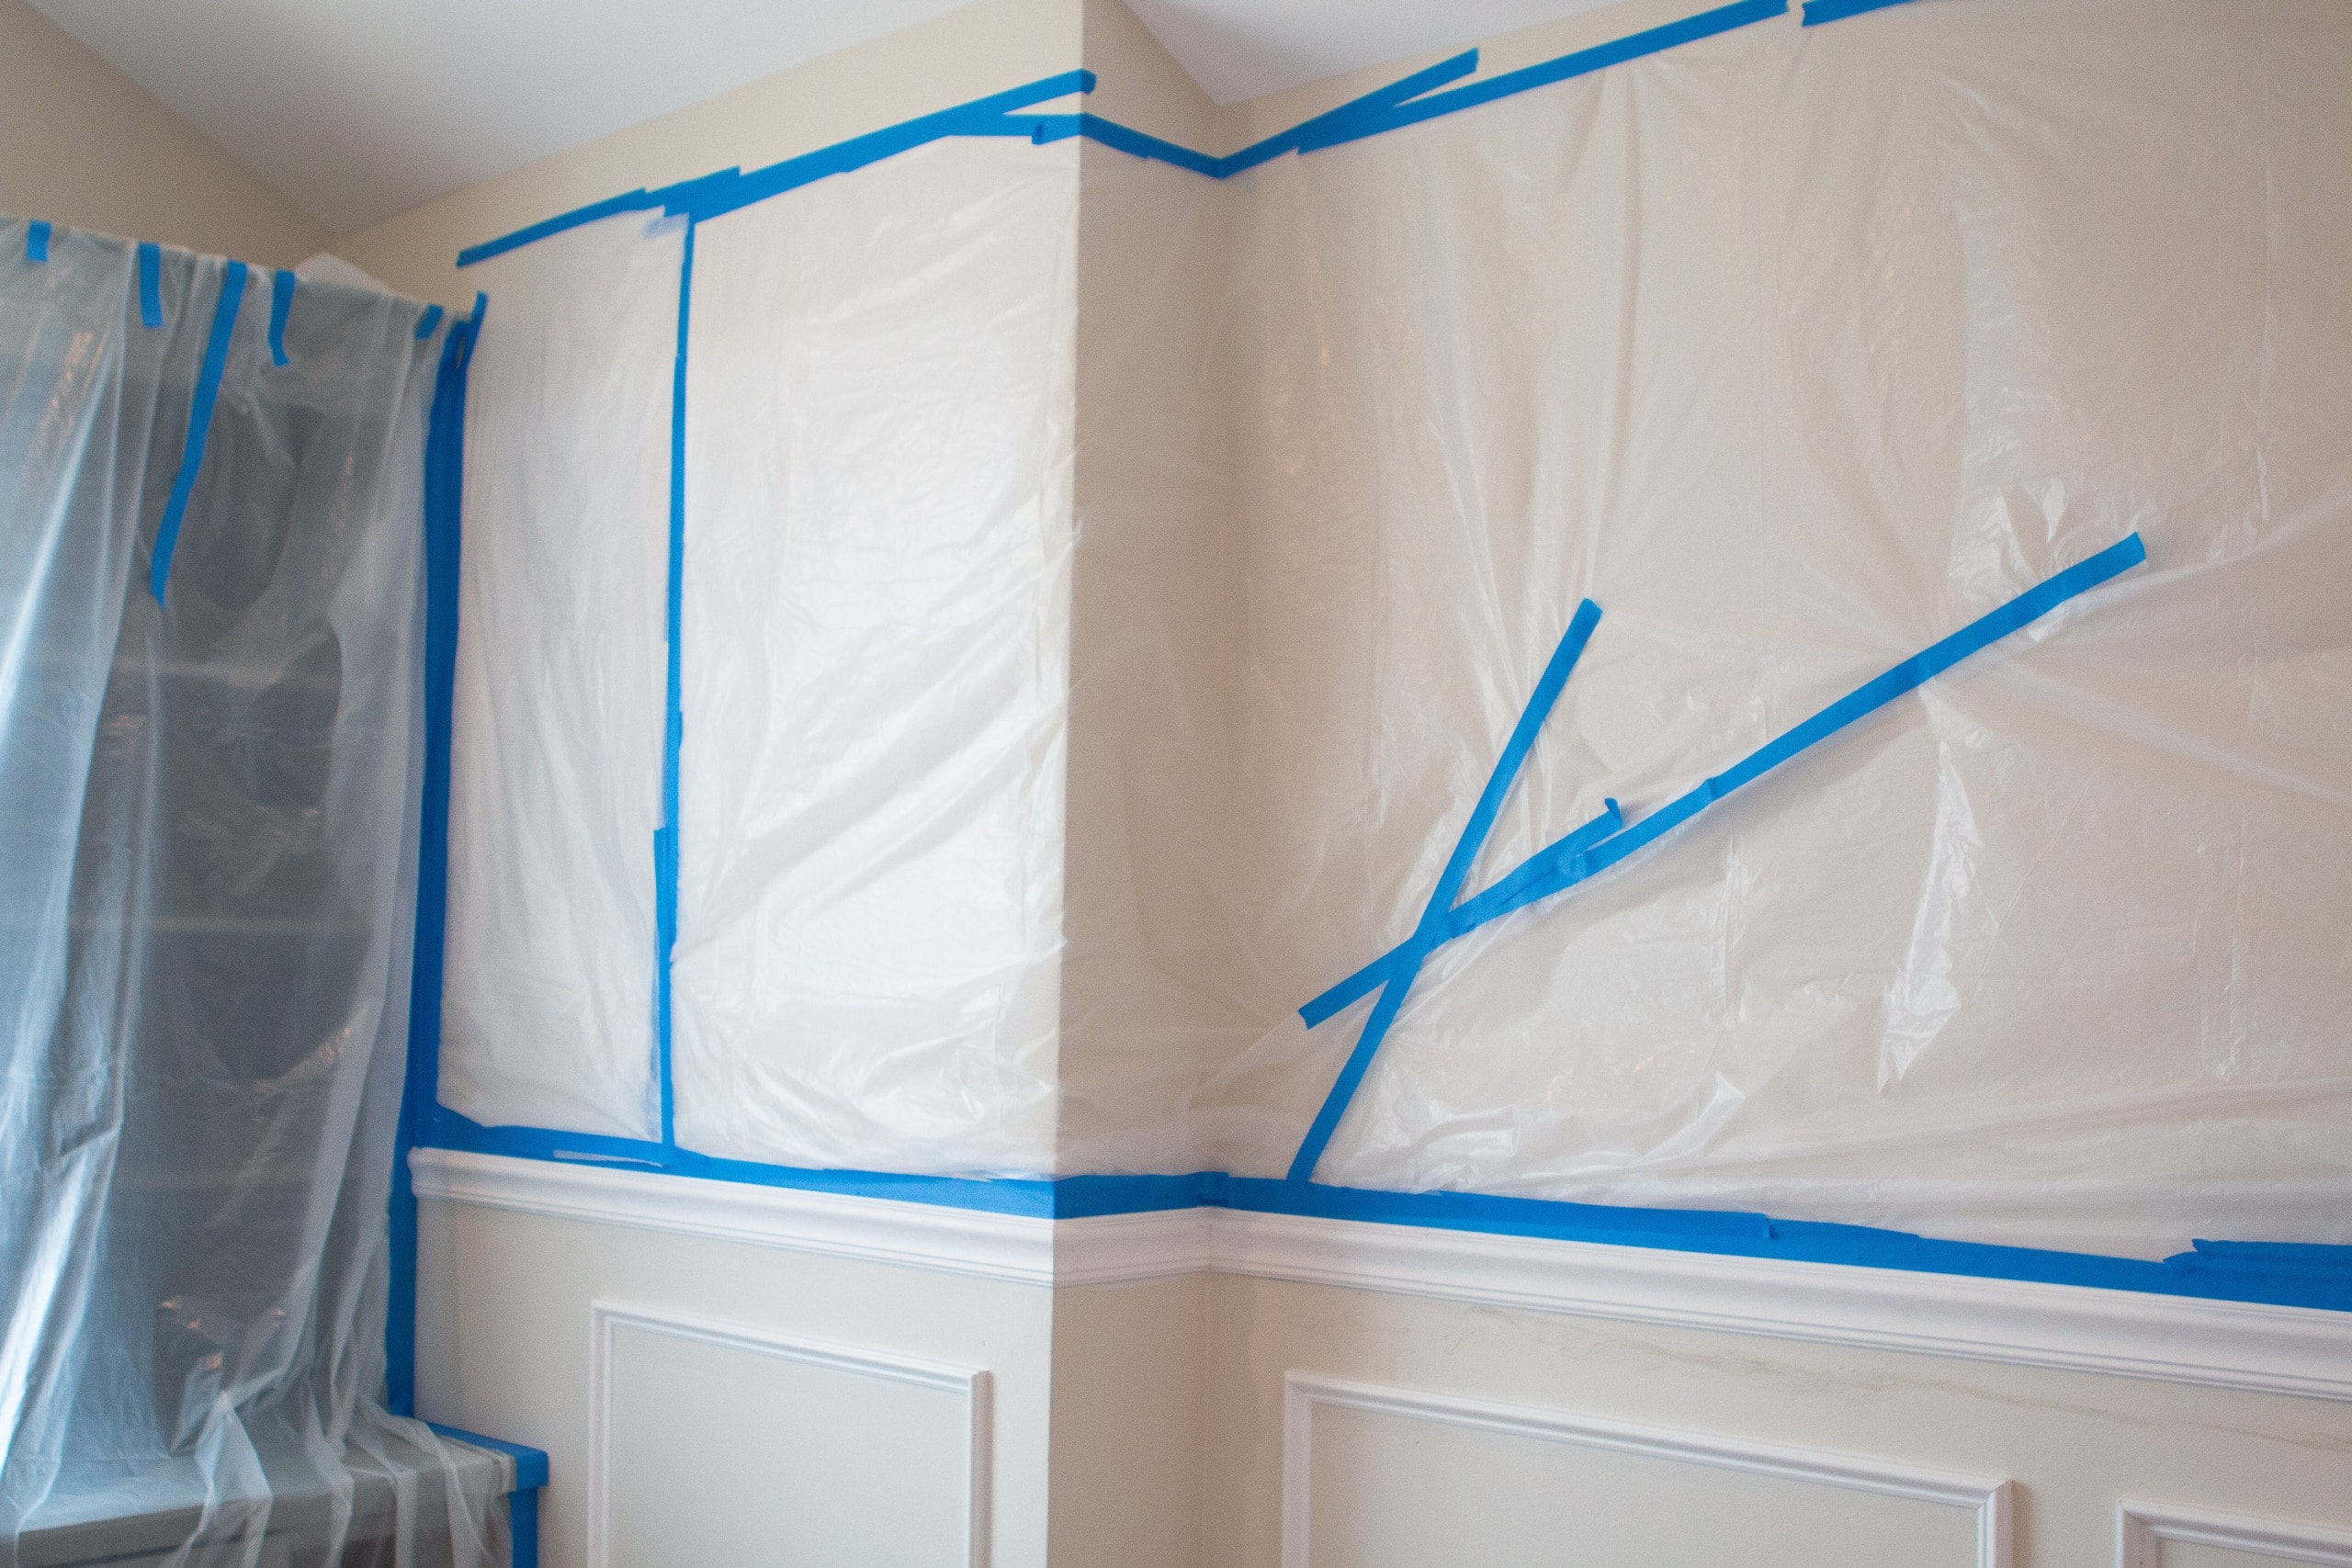 Prepping the room for the paint sprayer